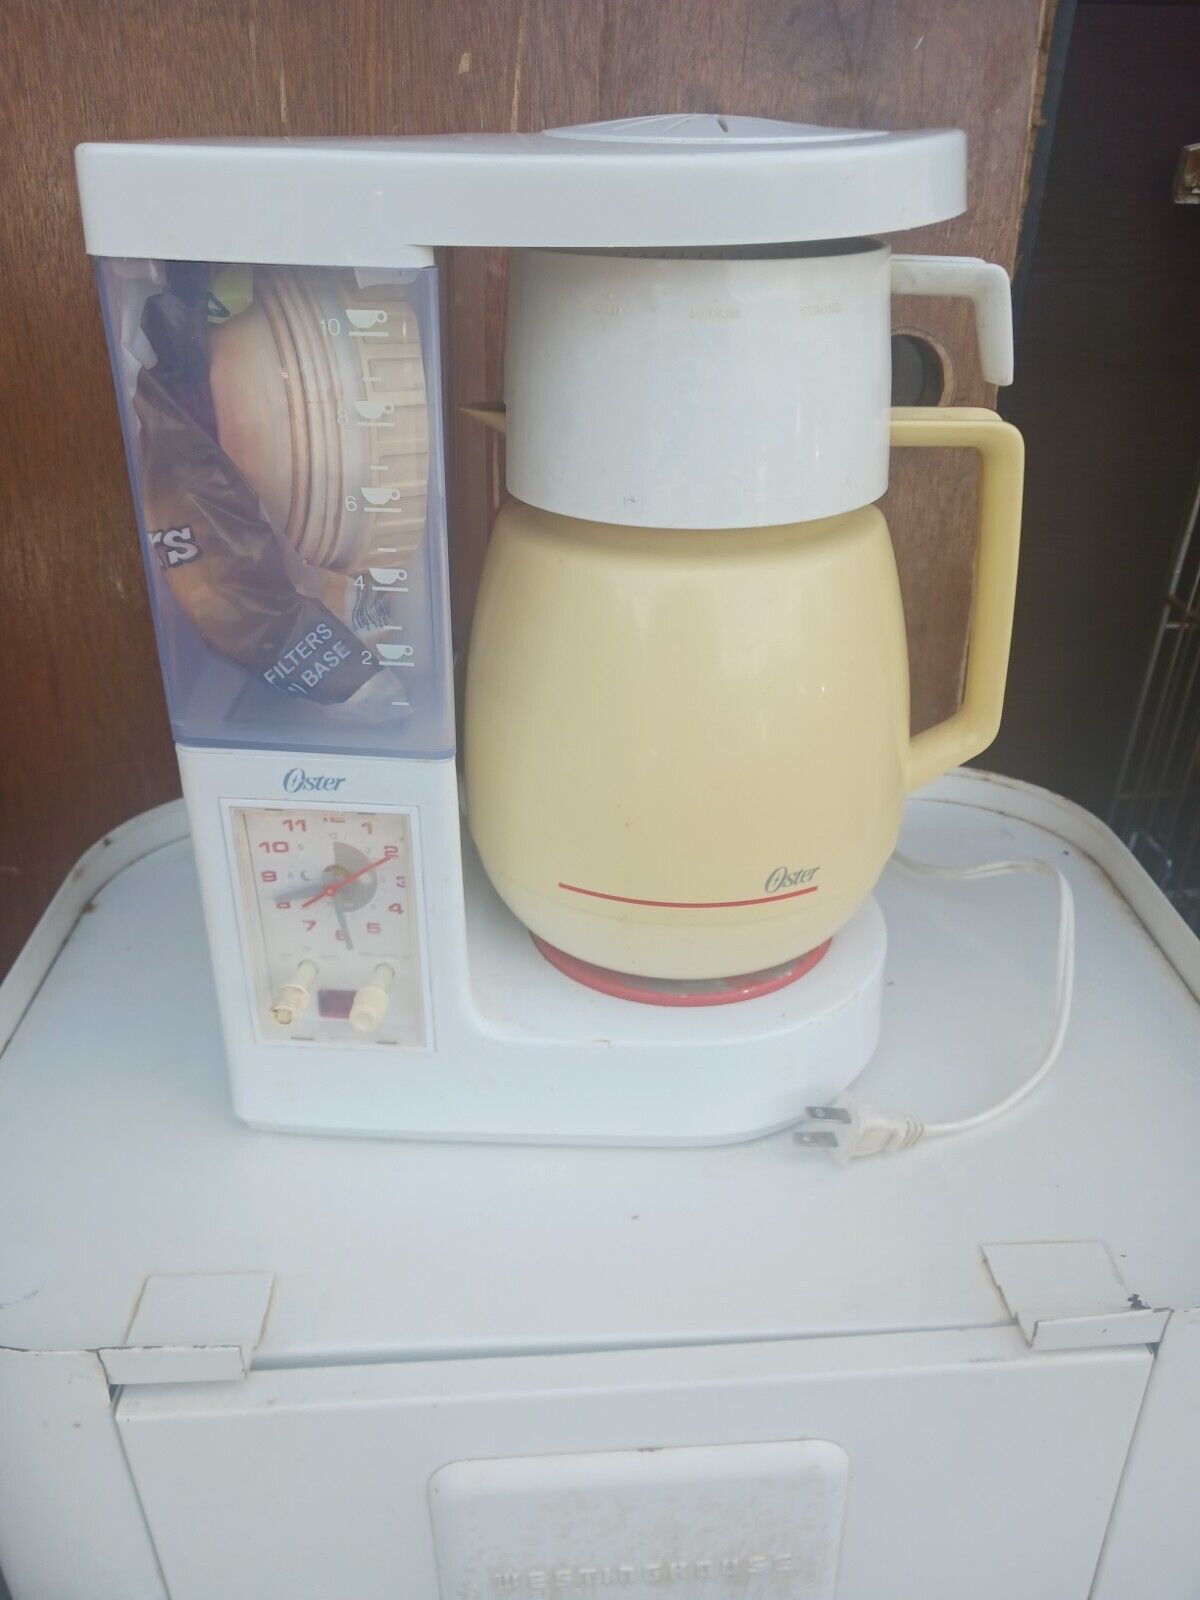 Vintage Oster Coffee Maker With Carafe Model 666-48a